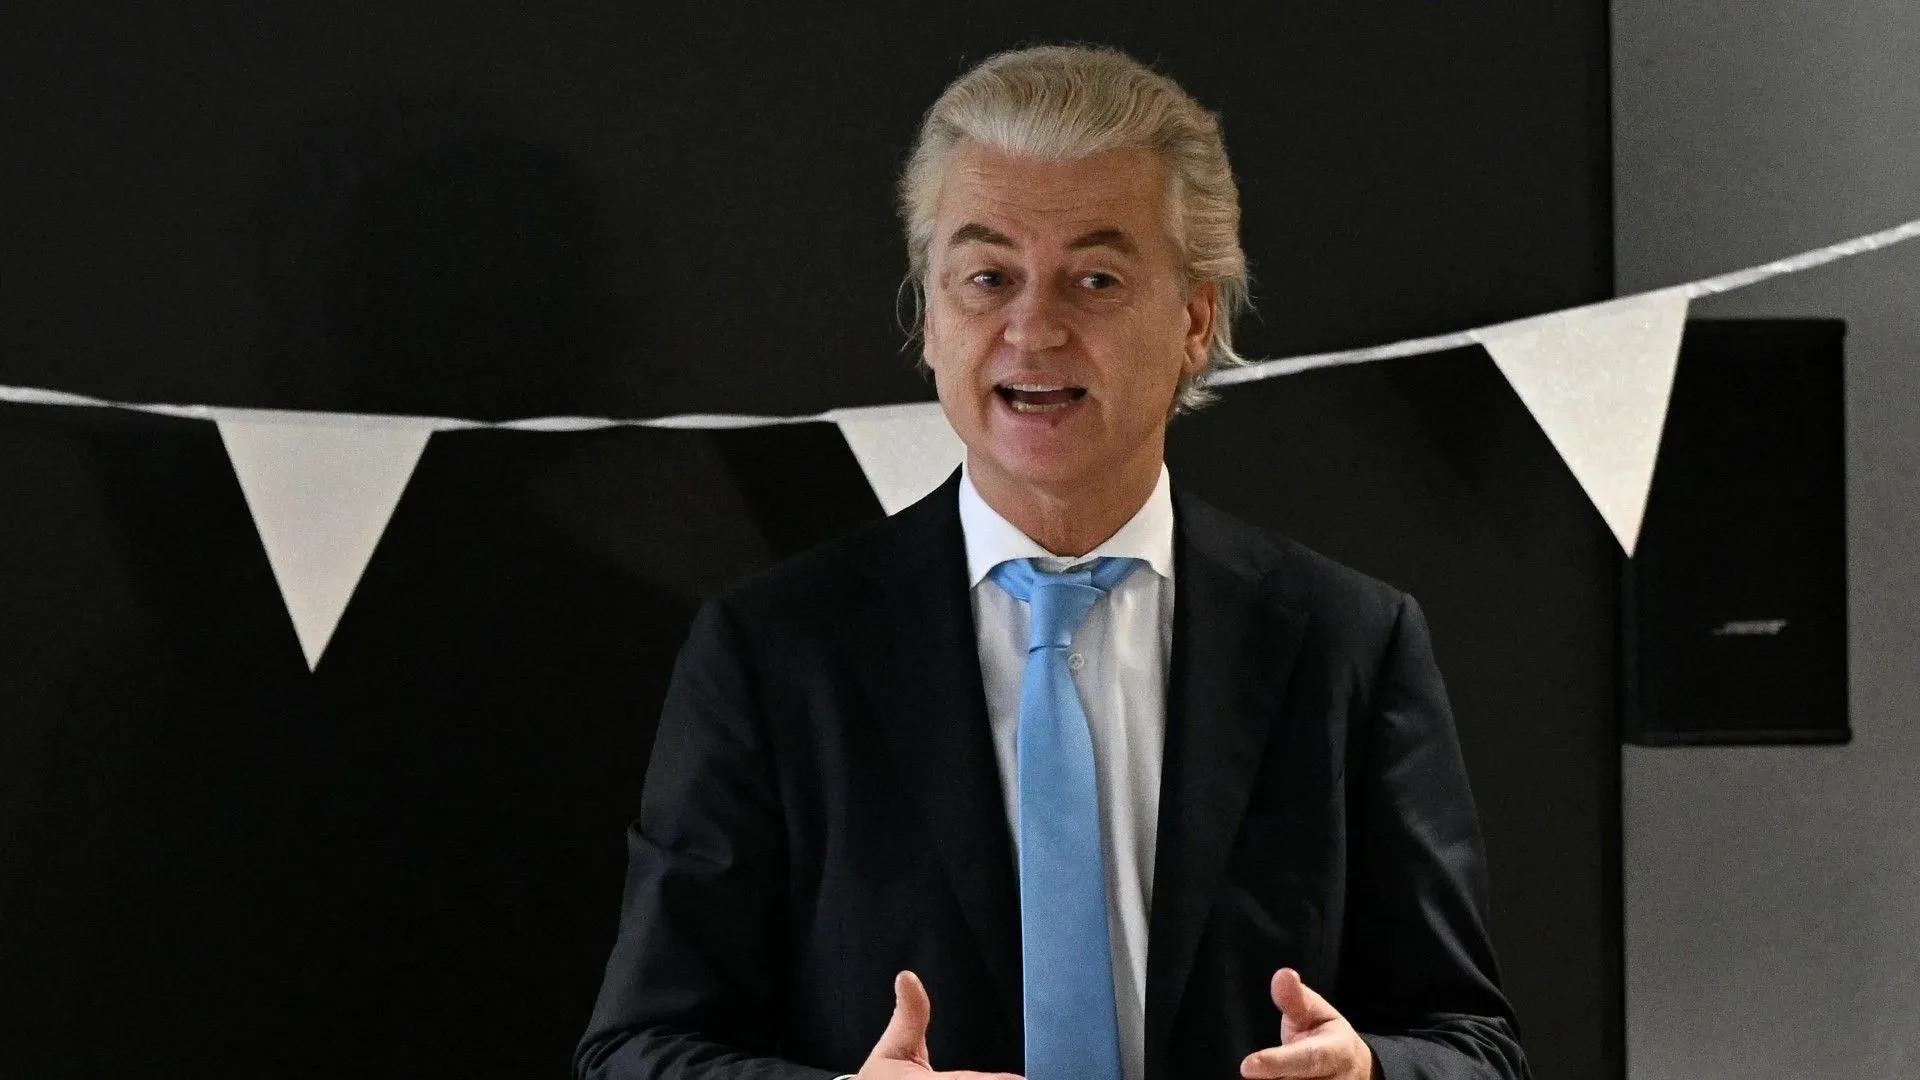 Netherlands: Right-wing populist Wilders resigns as head of government